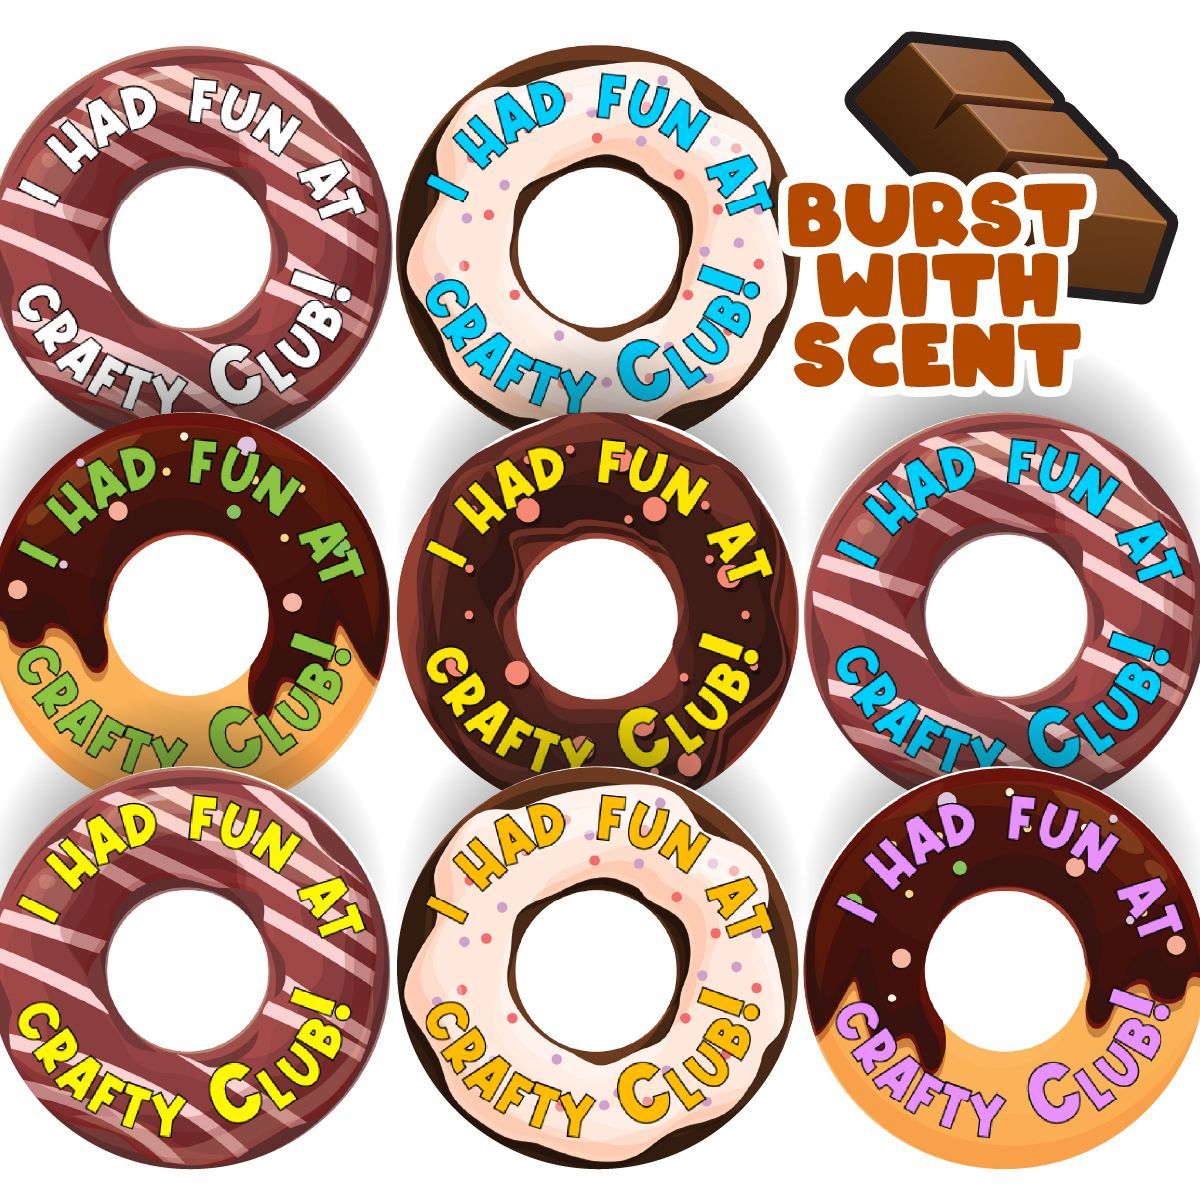 🍩  New 🍩 
Personalised Chocolate Scented Donuts

And don't forget.....15% off ALL non-personalised stickers - THIS WEEK only - buff.ly/41FYben
#rewardstickers #stickershop #stickerrewards #stickerlove #Rewards #RewardSystem #schoolstickers #ukteachers #teacherstickers